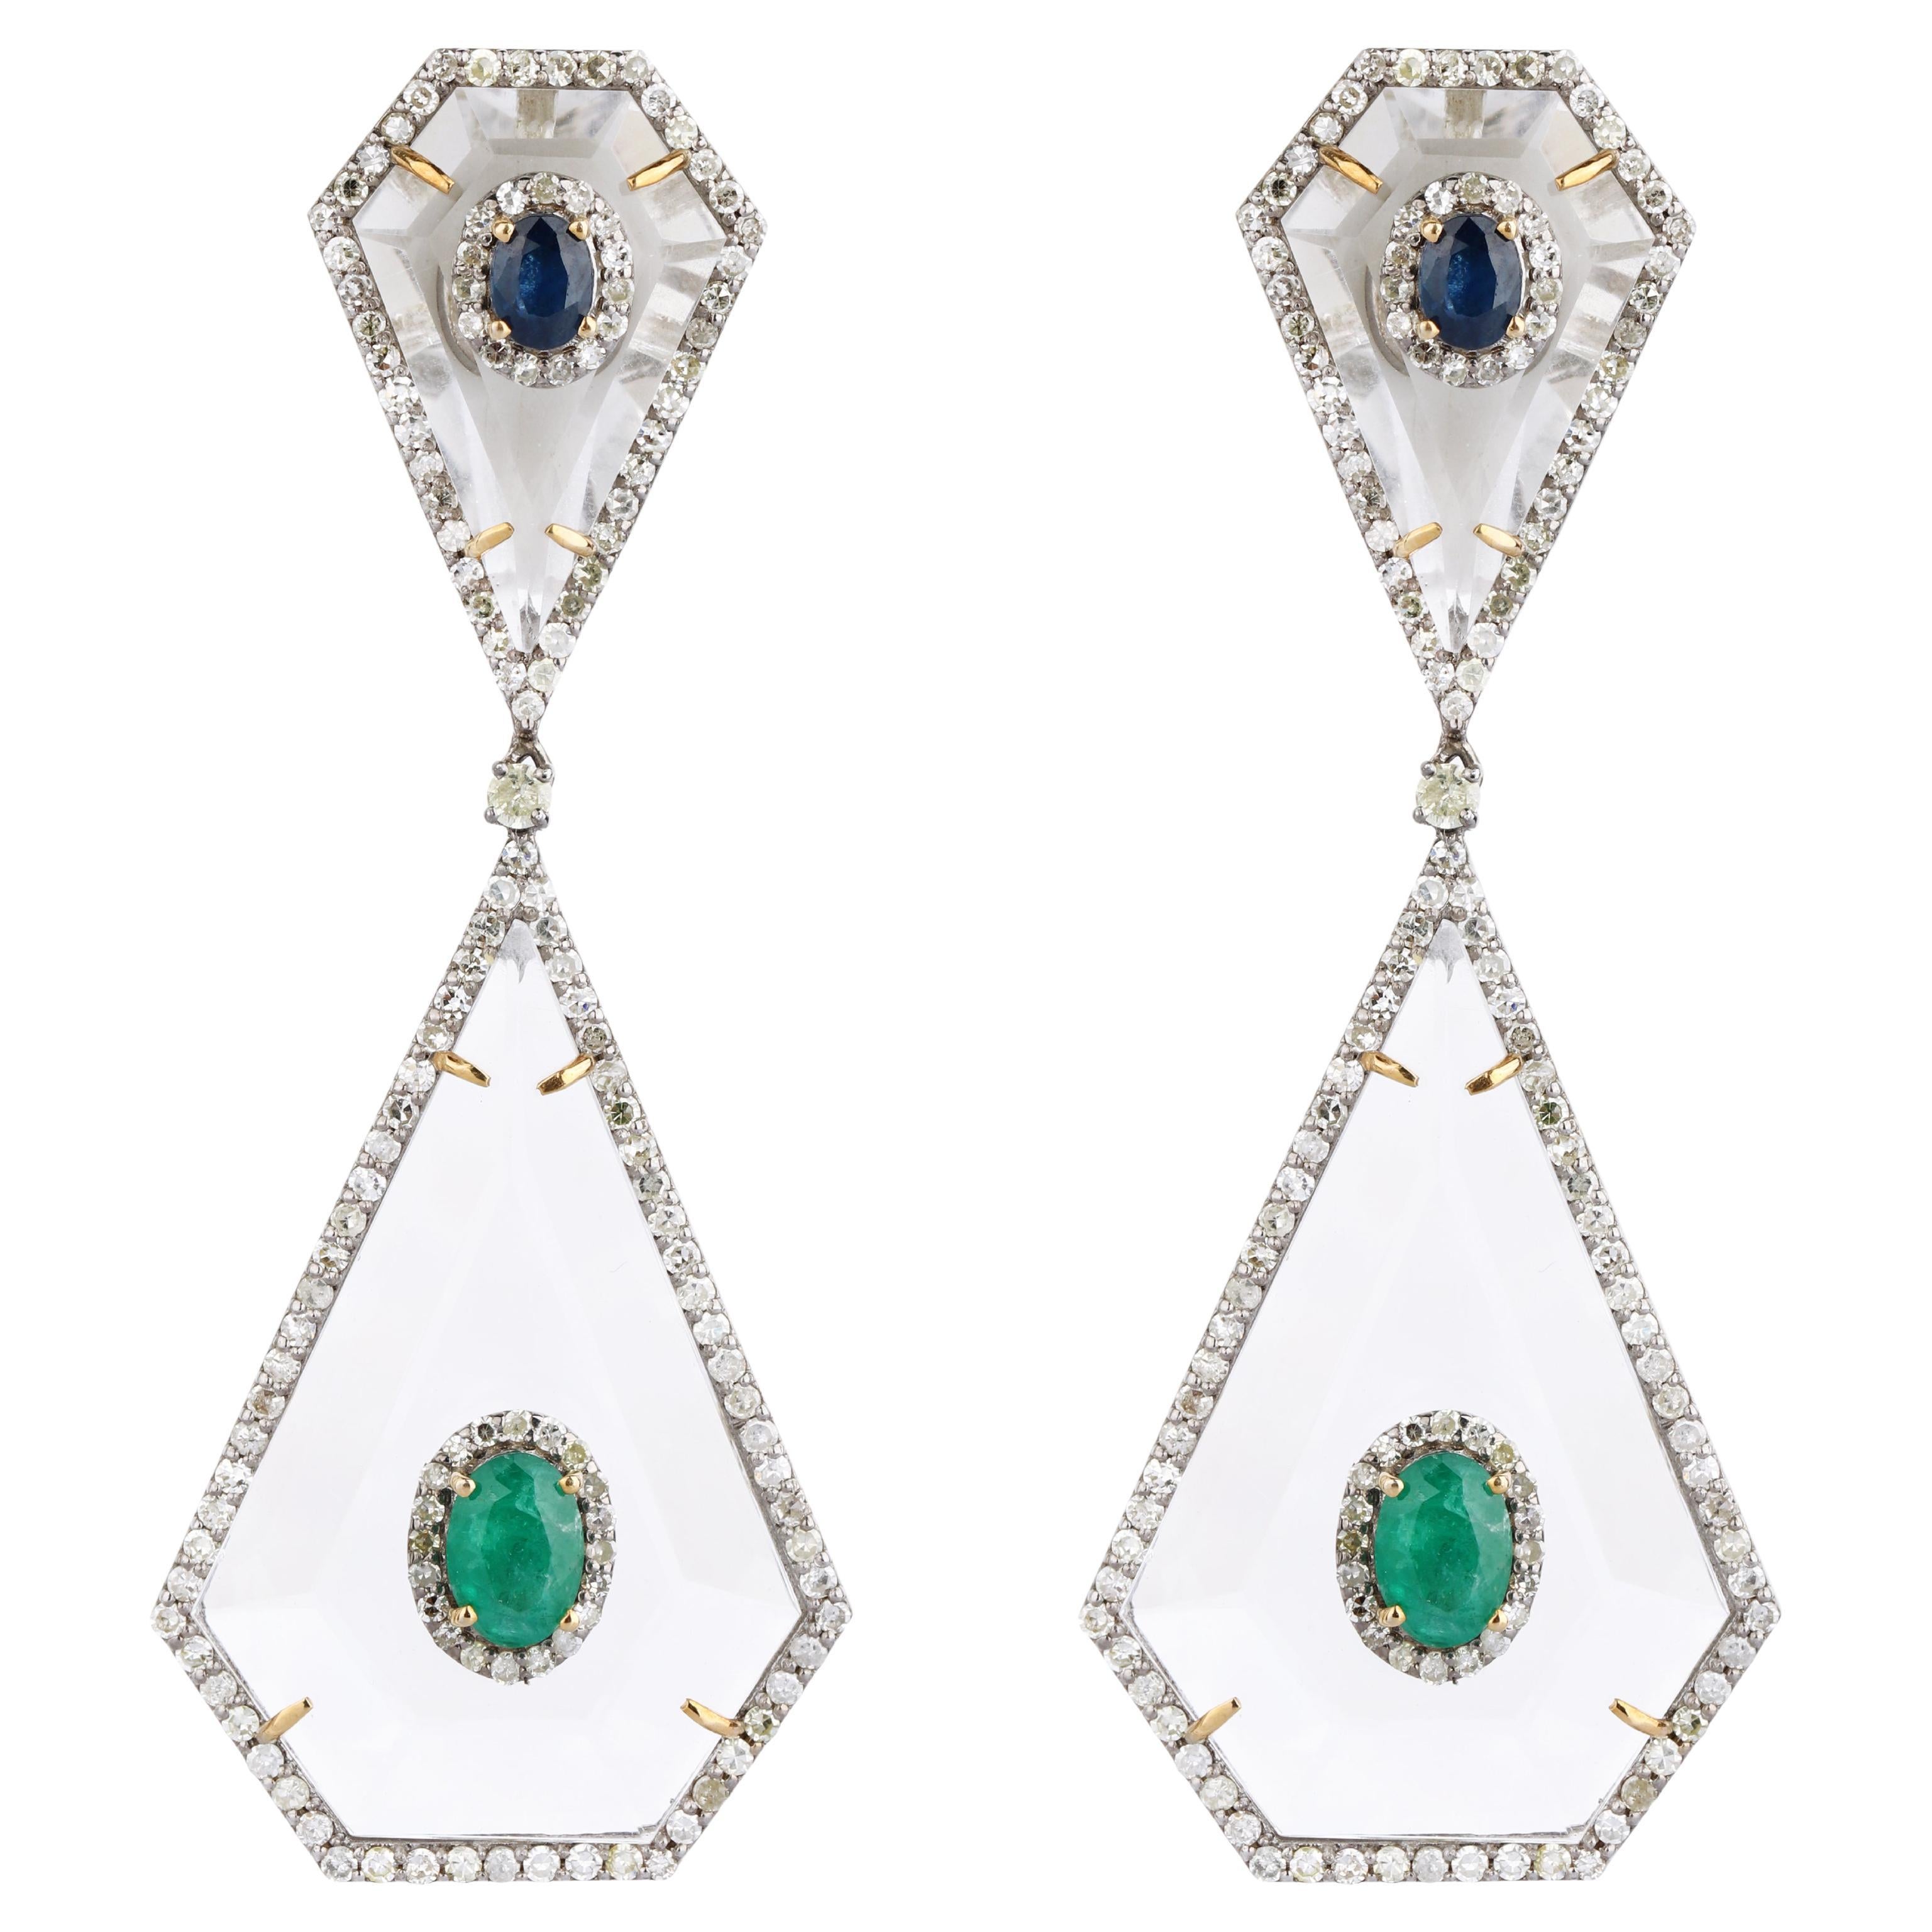 29.20 Carats Crystal, Diamond, Emerald, and Sapphire Dangle Earrings For Sale